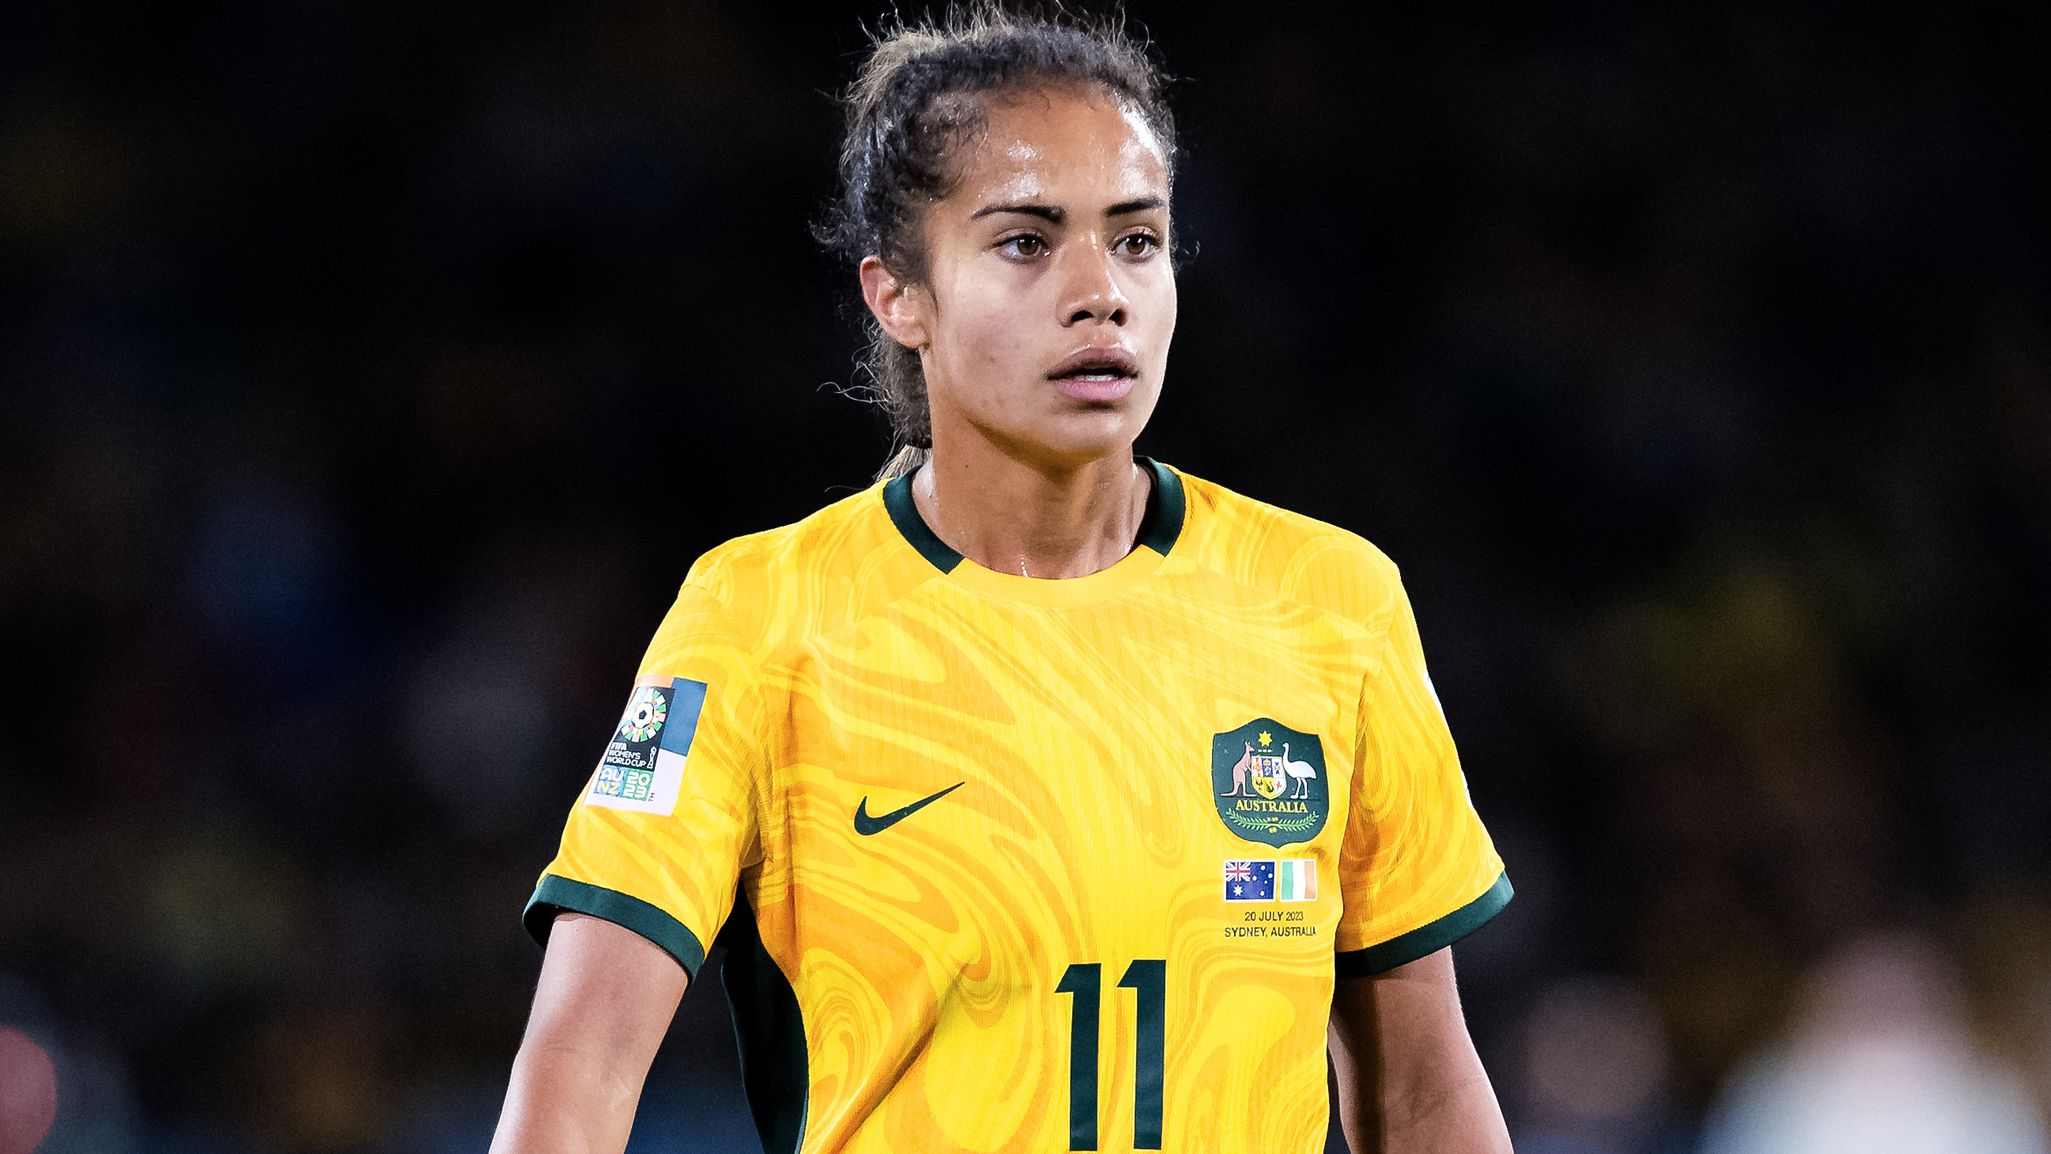 LIVE: Mystery remains over Matildas star's fitness